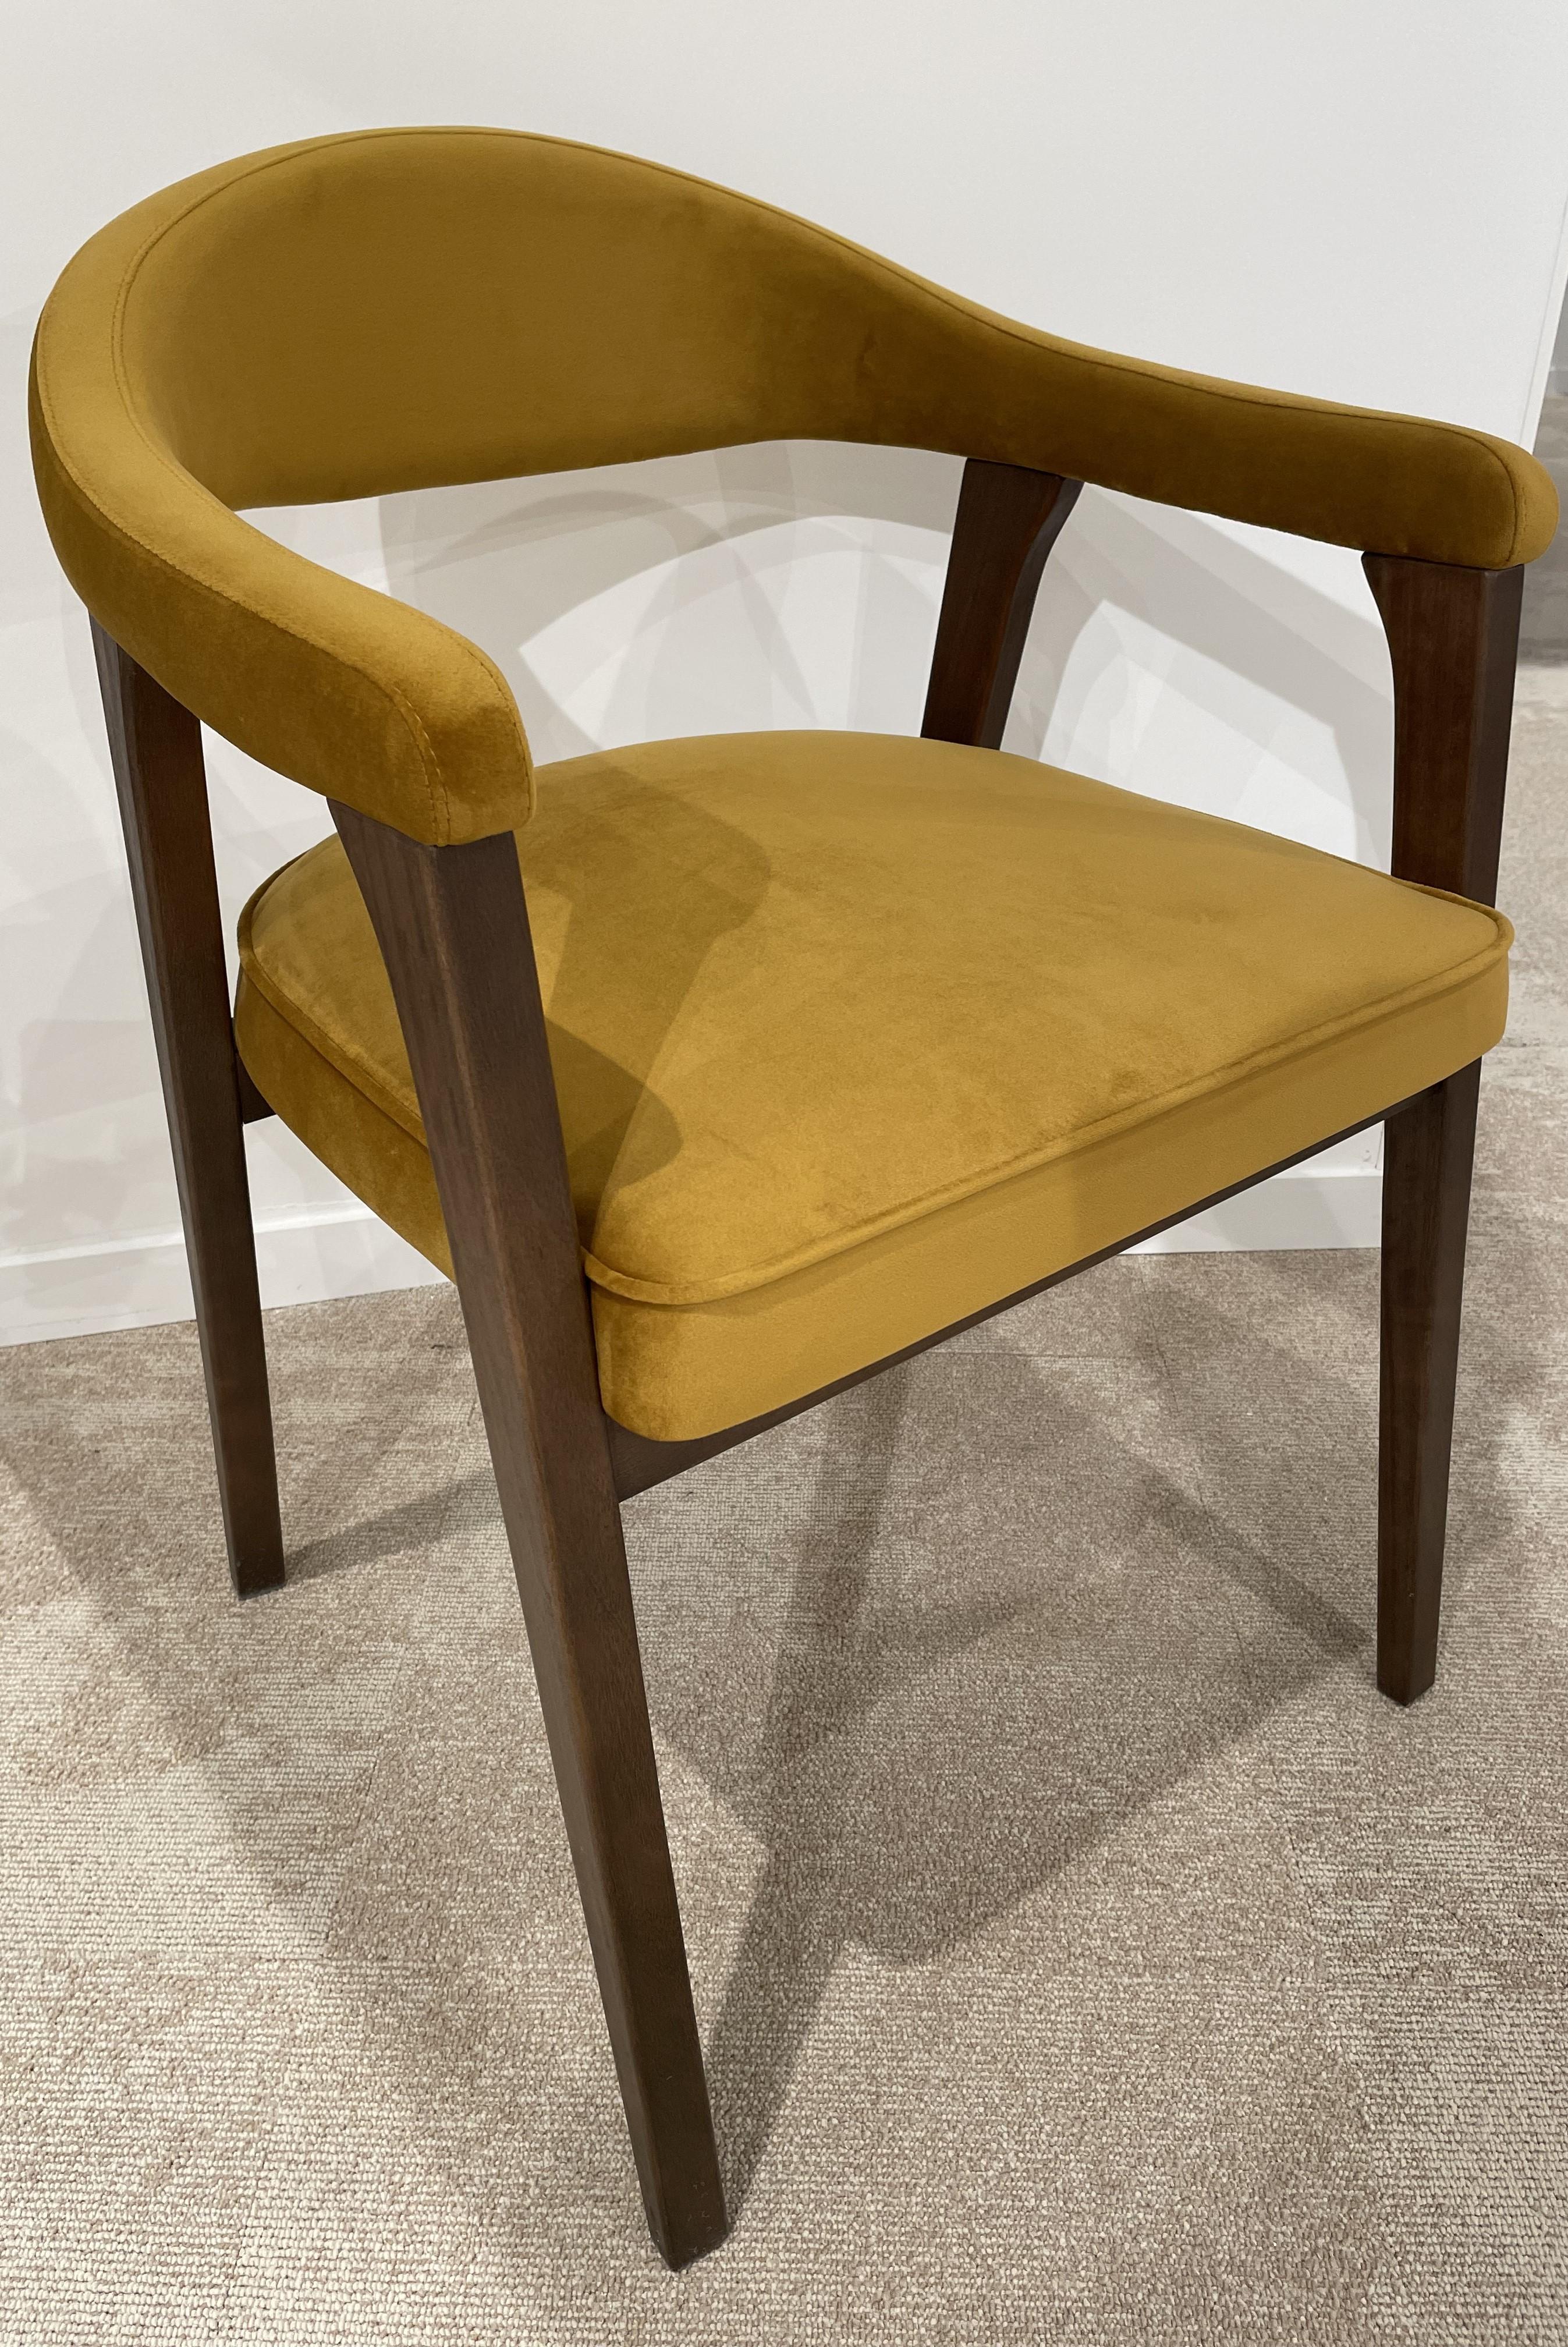 1960s Danish Design and Scandinavian Style Wooden and Velvet Fabric Chair For Sale 4